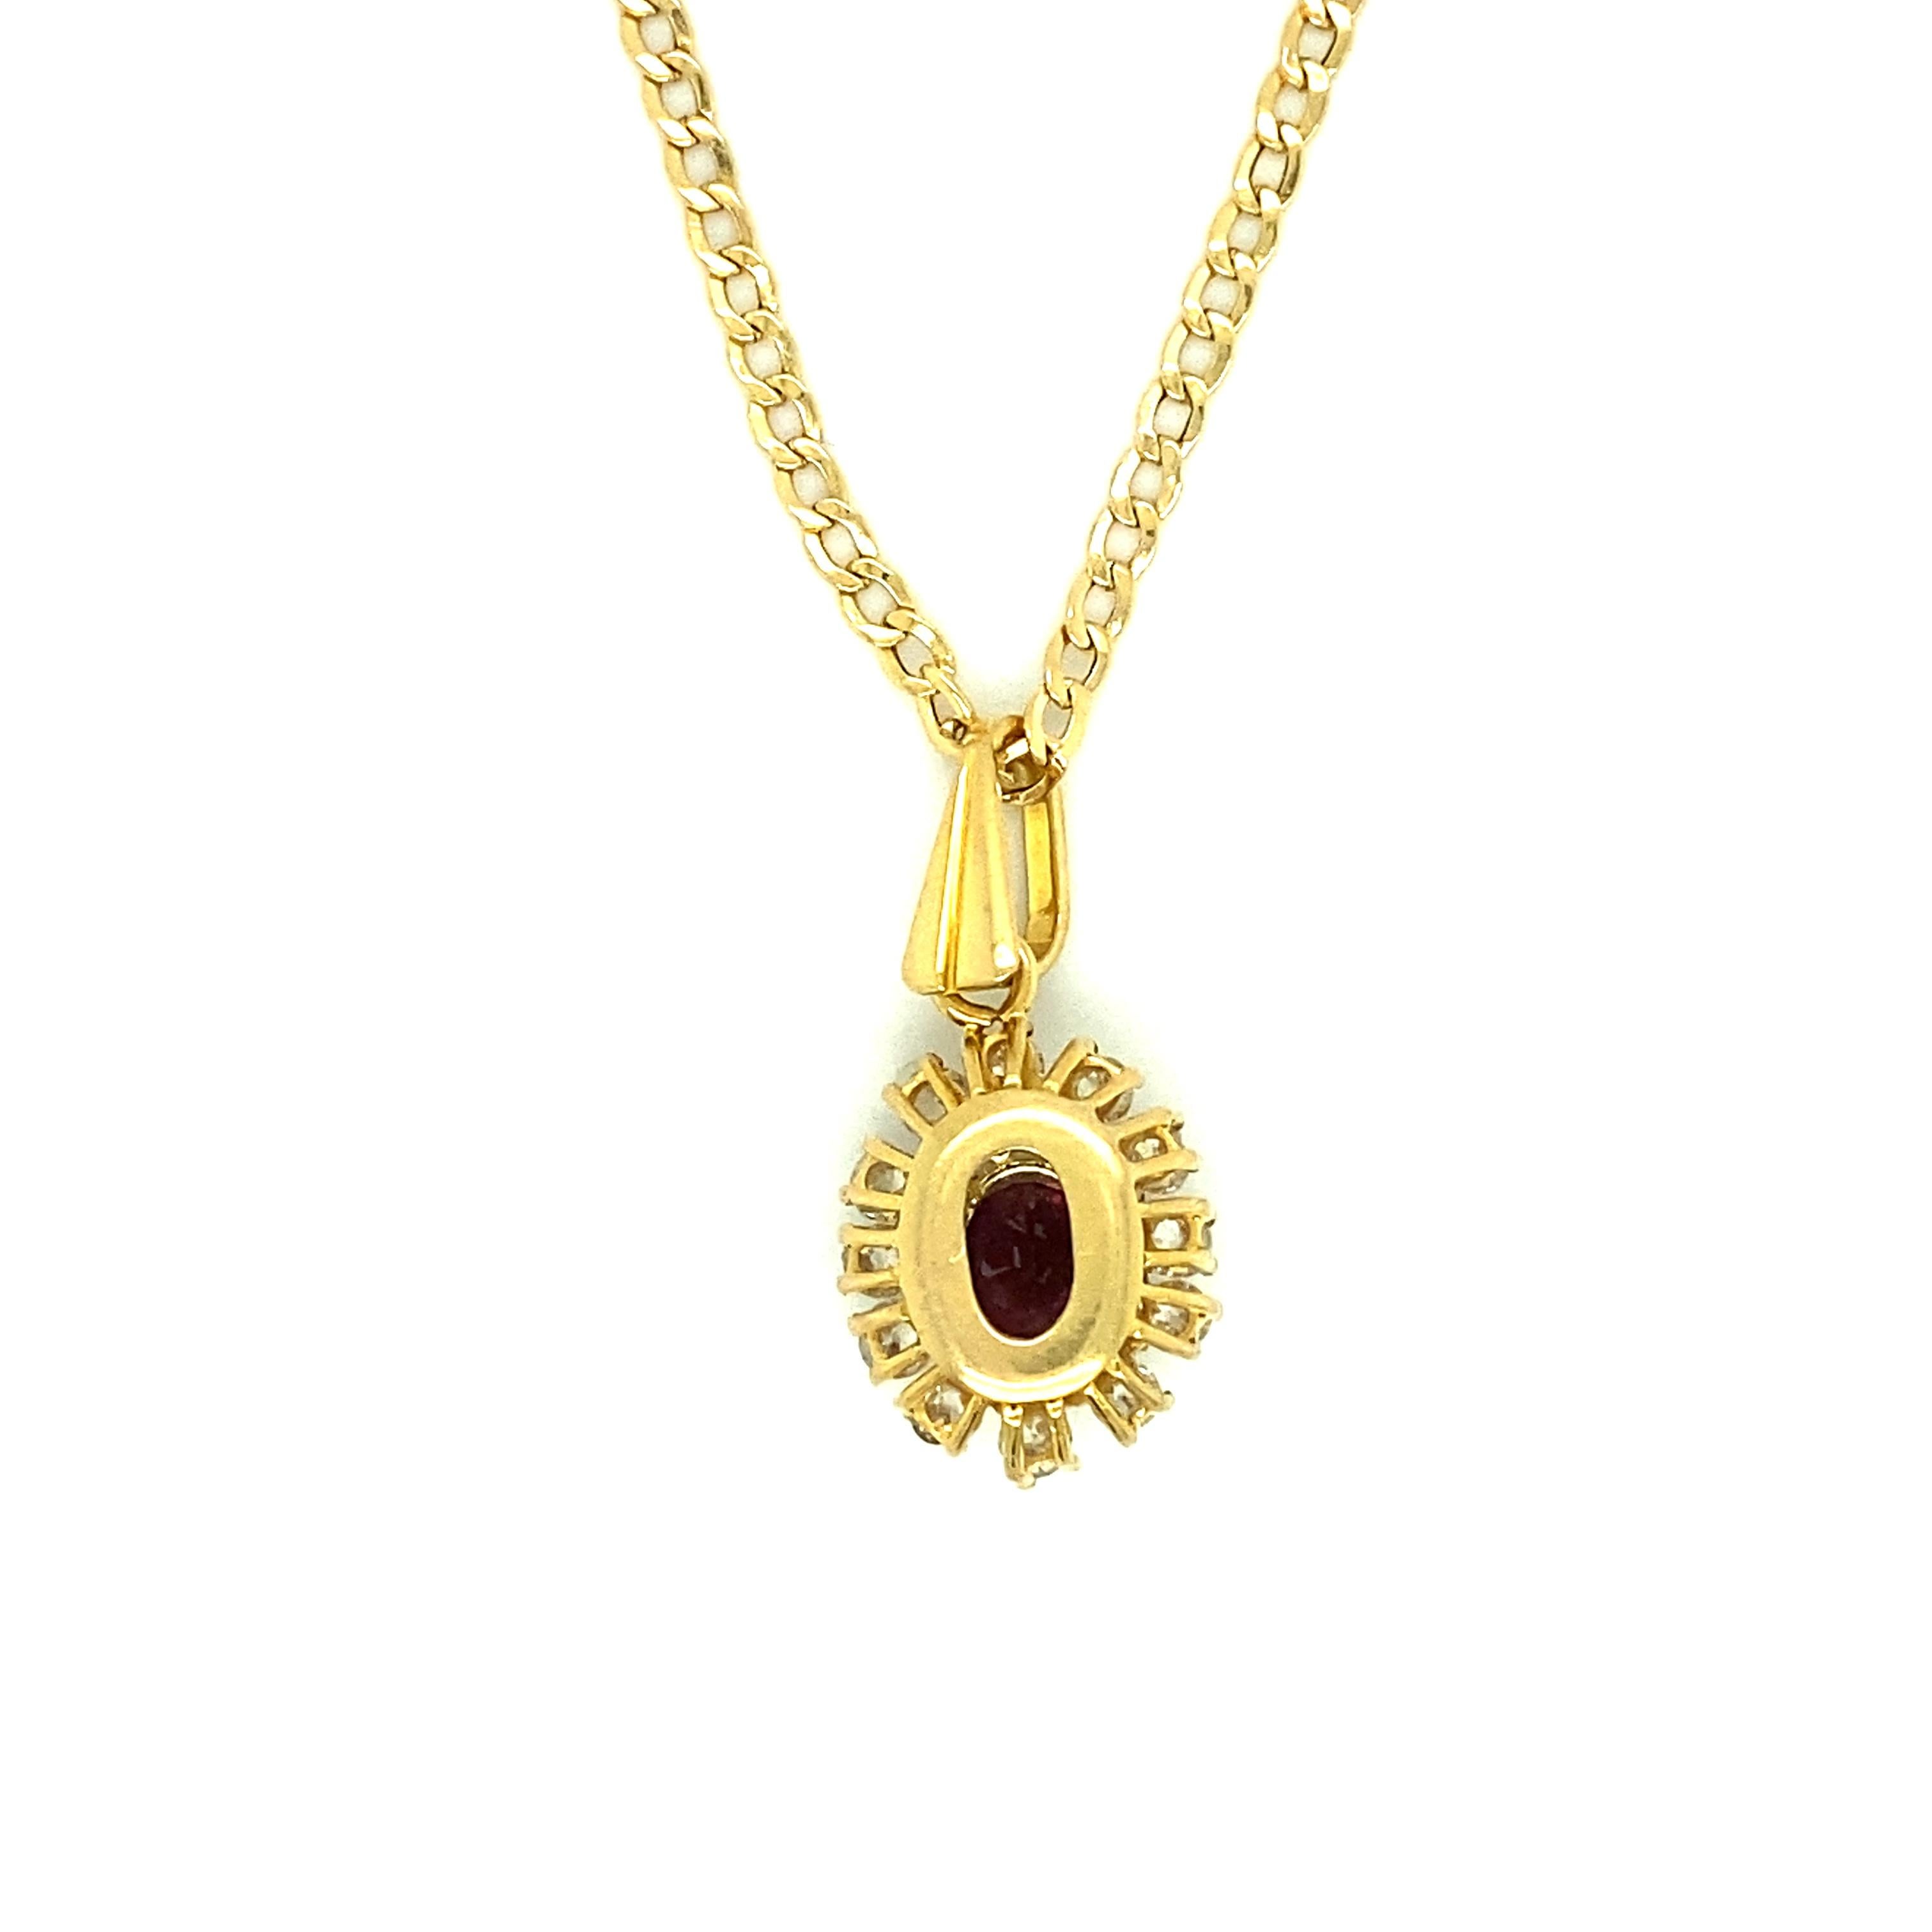 Offered here is a vintage 18kt yellow gold pendant centered with a natural earth mined vivid red ruby from Thailand  weighing 1.37 ct, excellent quality, framed with 12 natural earth mined old European cut diamonds weighing approximately 0.60 ct